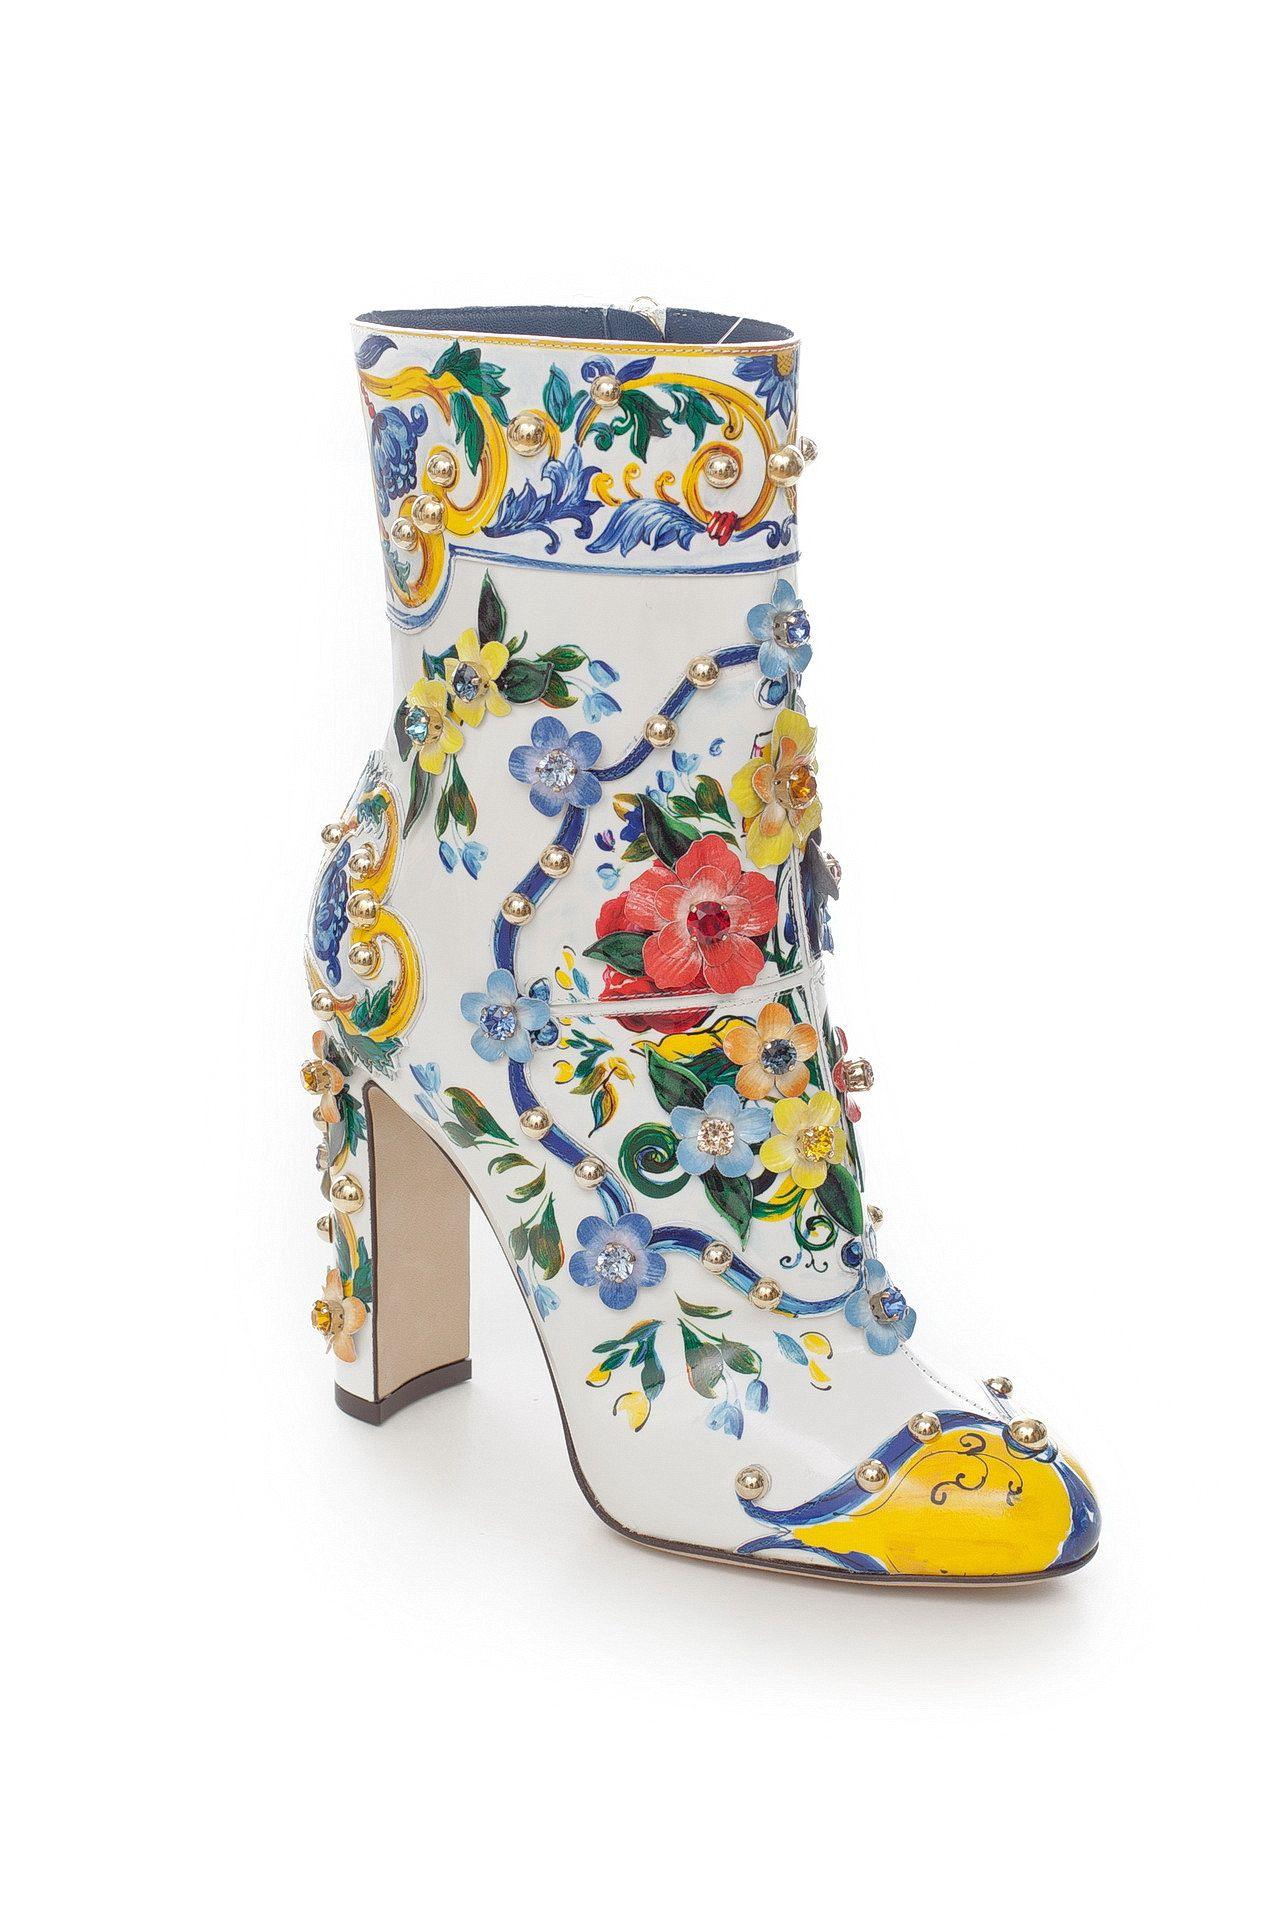 Dolce & Gabbana Majolica Painted Leather Ankle Boots

Finished with applique, crystals and pearls

IT Size 39 - US 9

New
